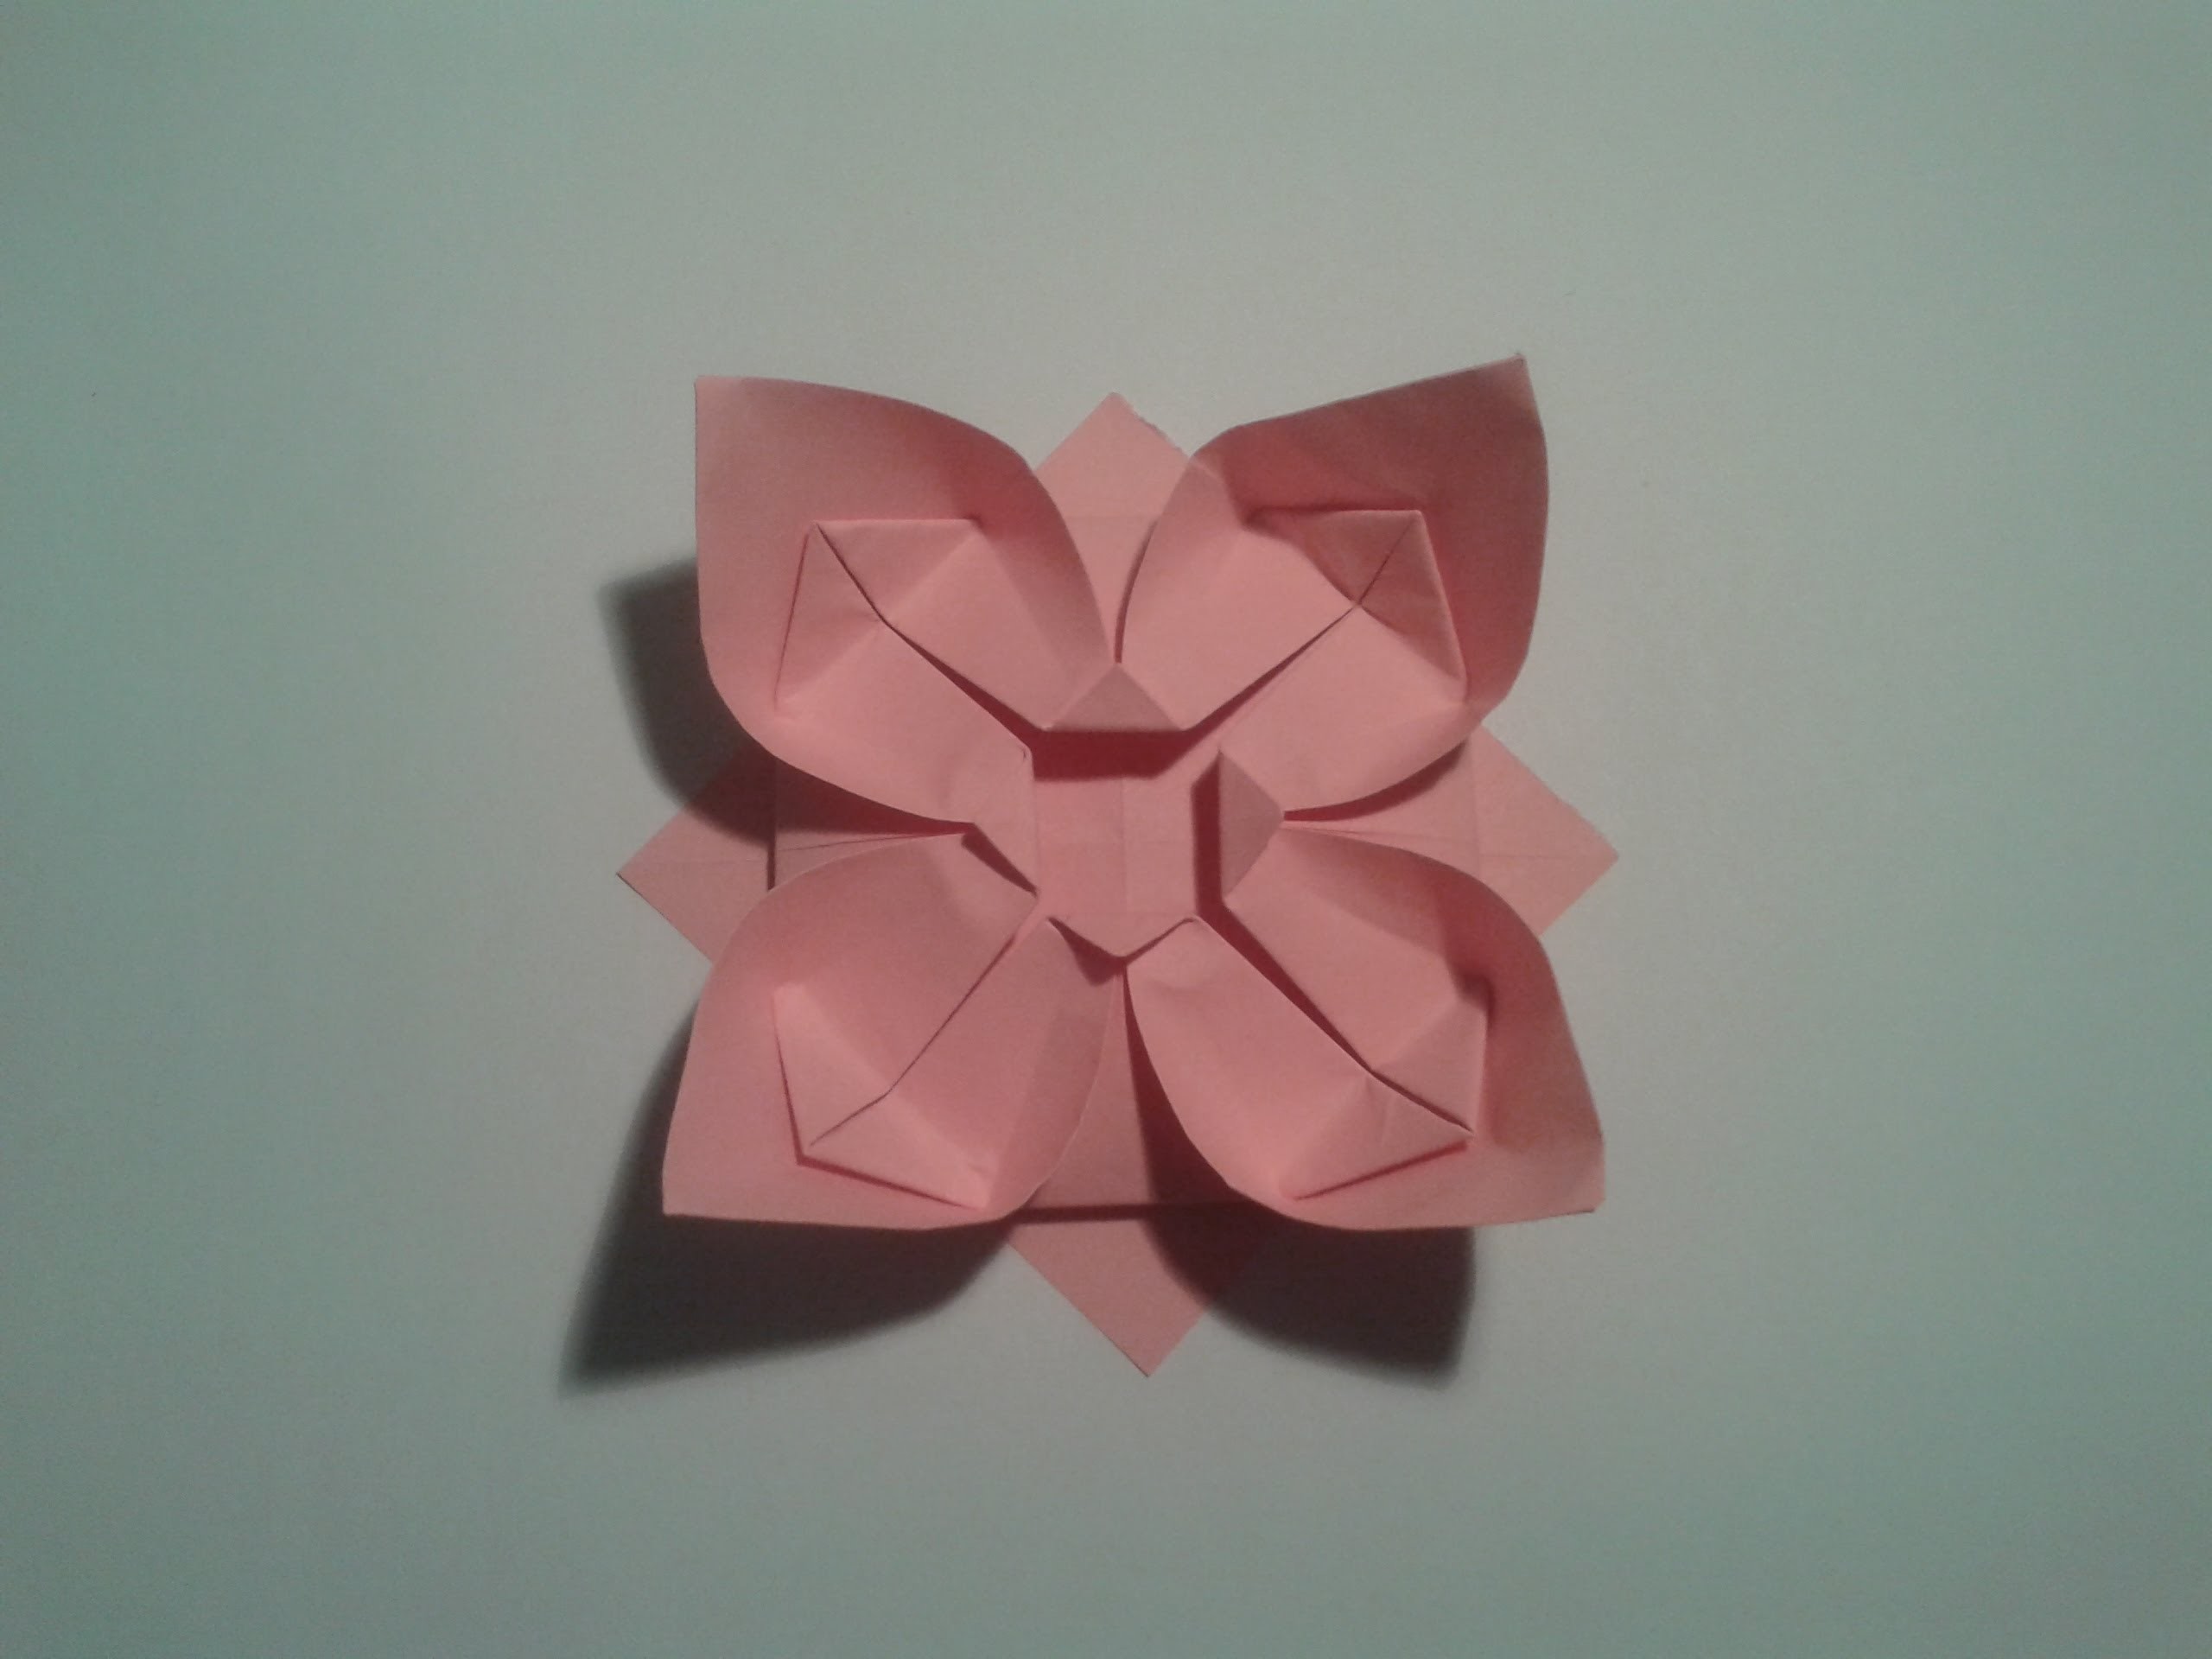 How to make an easy origami flower